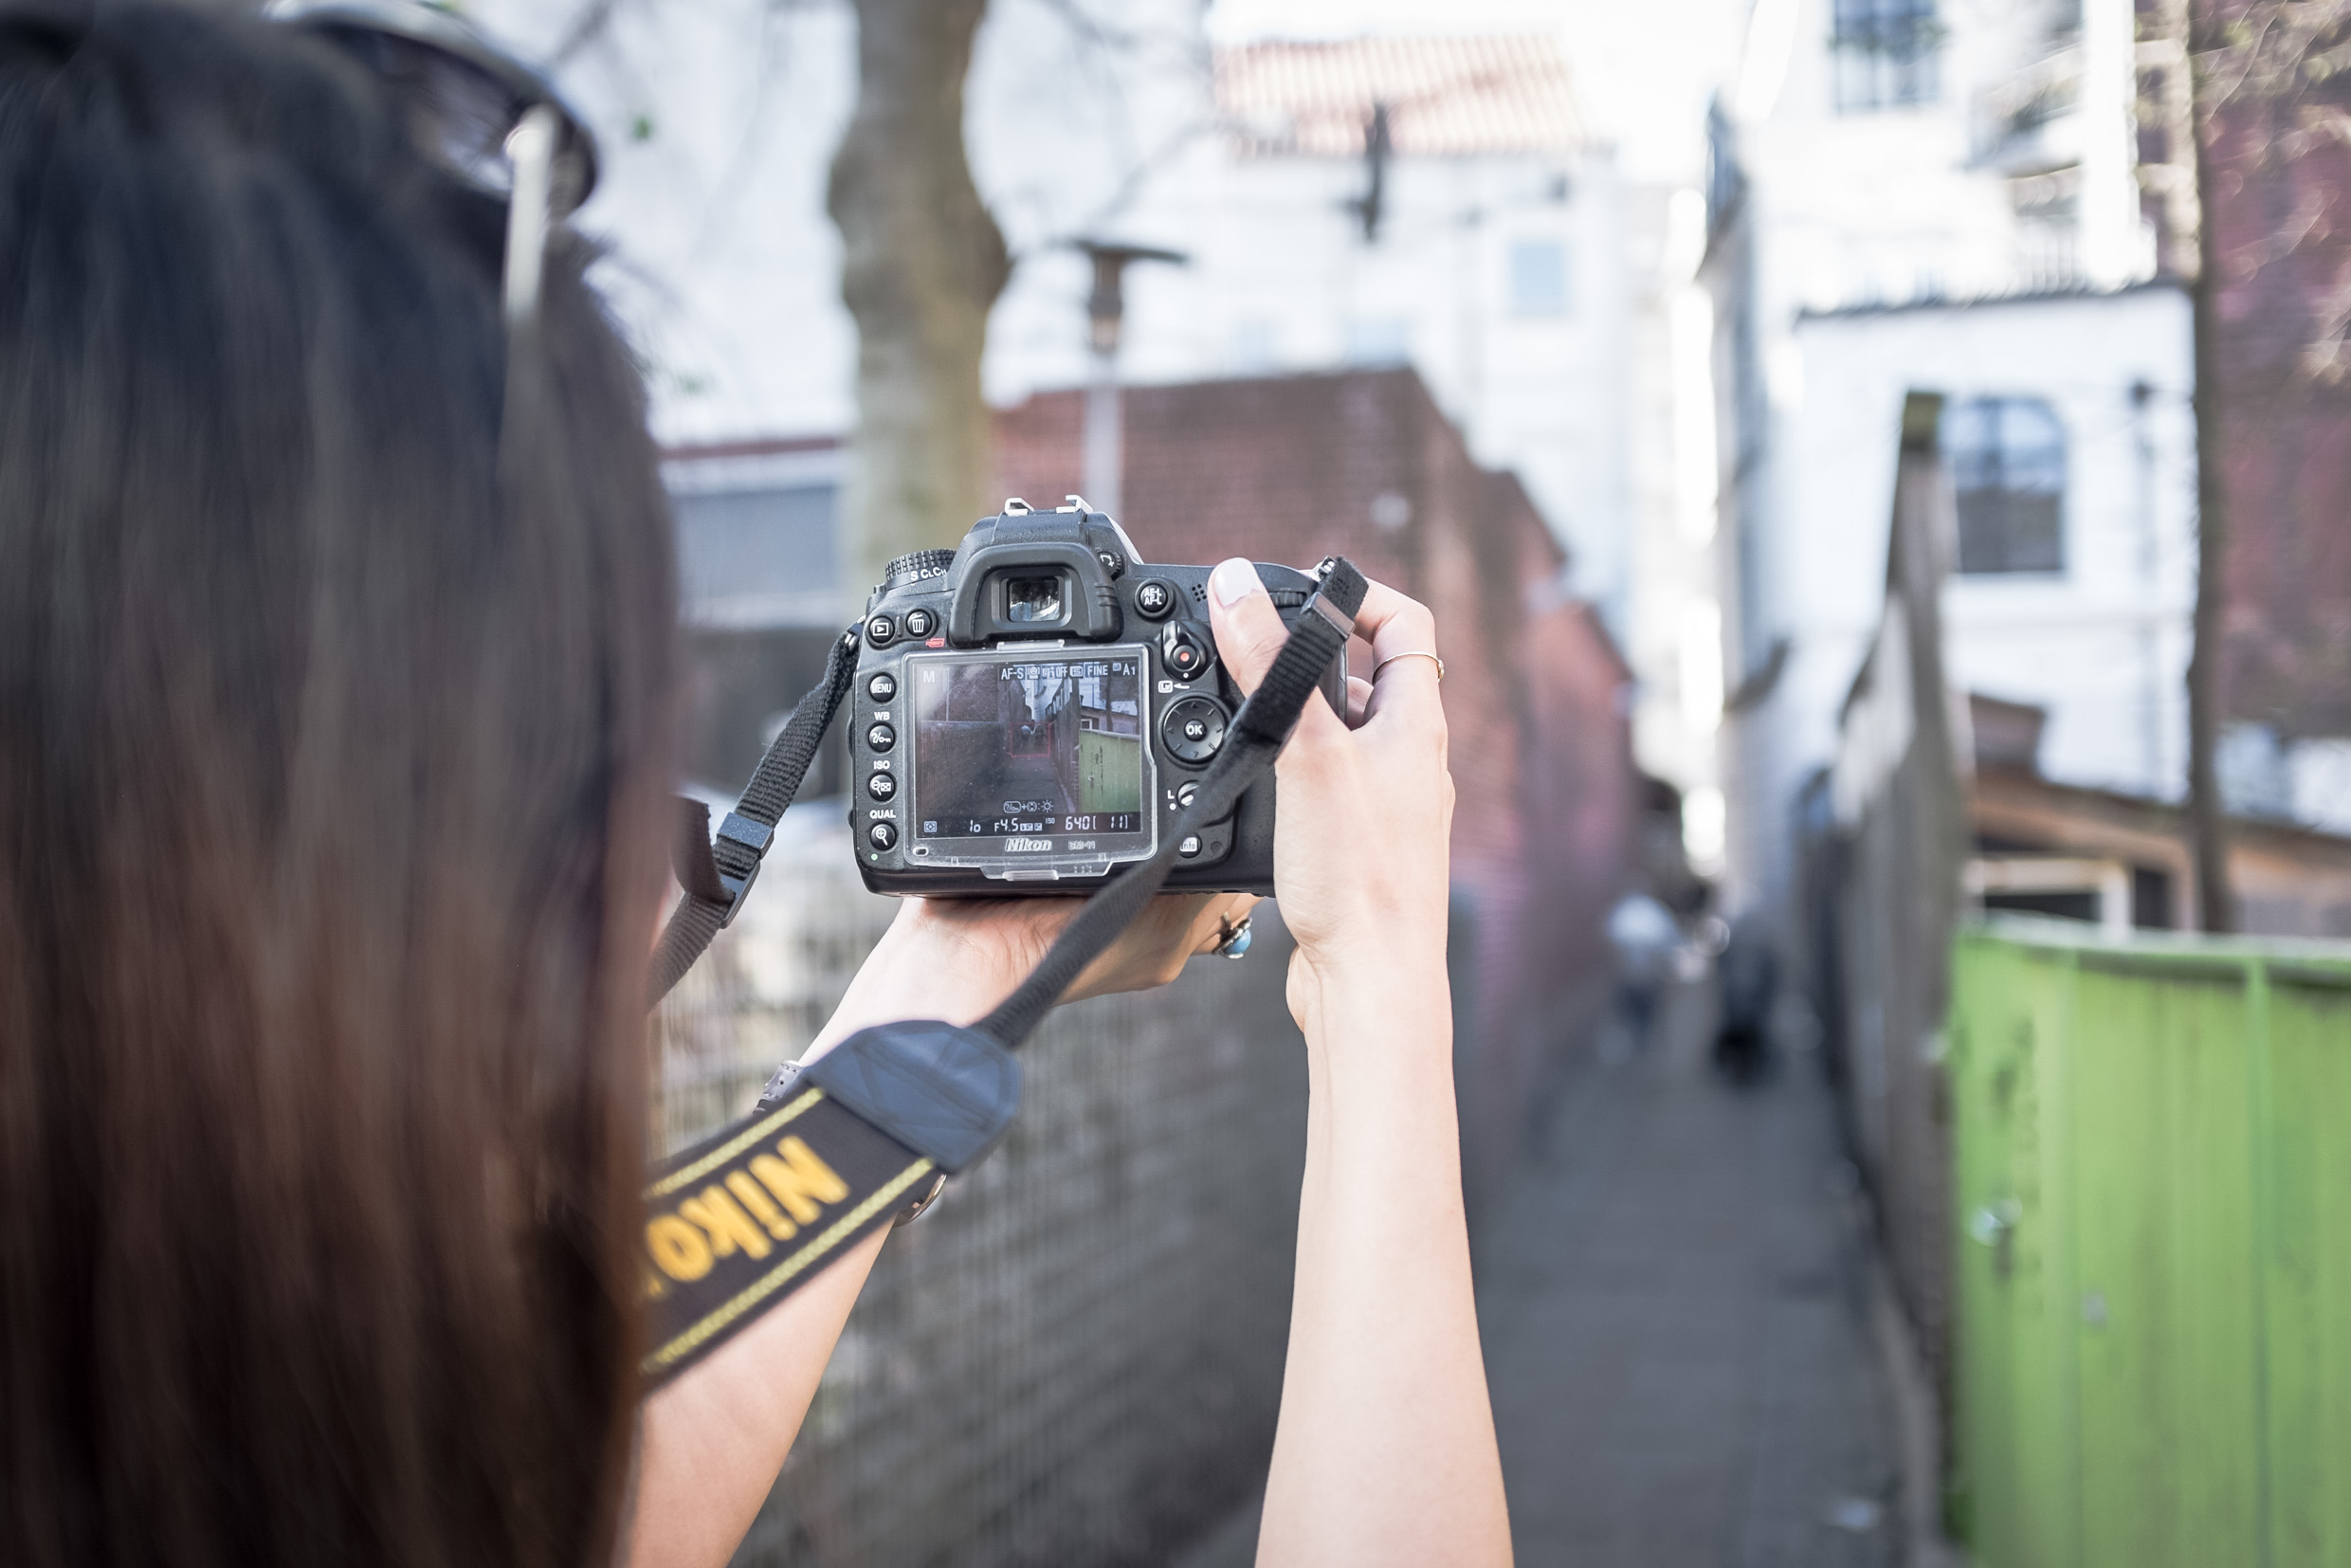 Arina holding a Nikon camera up in front of her, taking photos of an alley